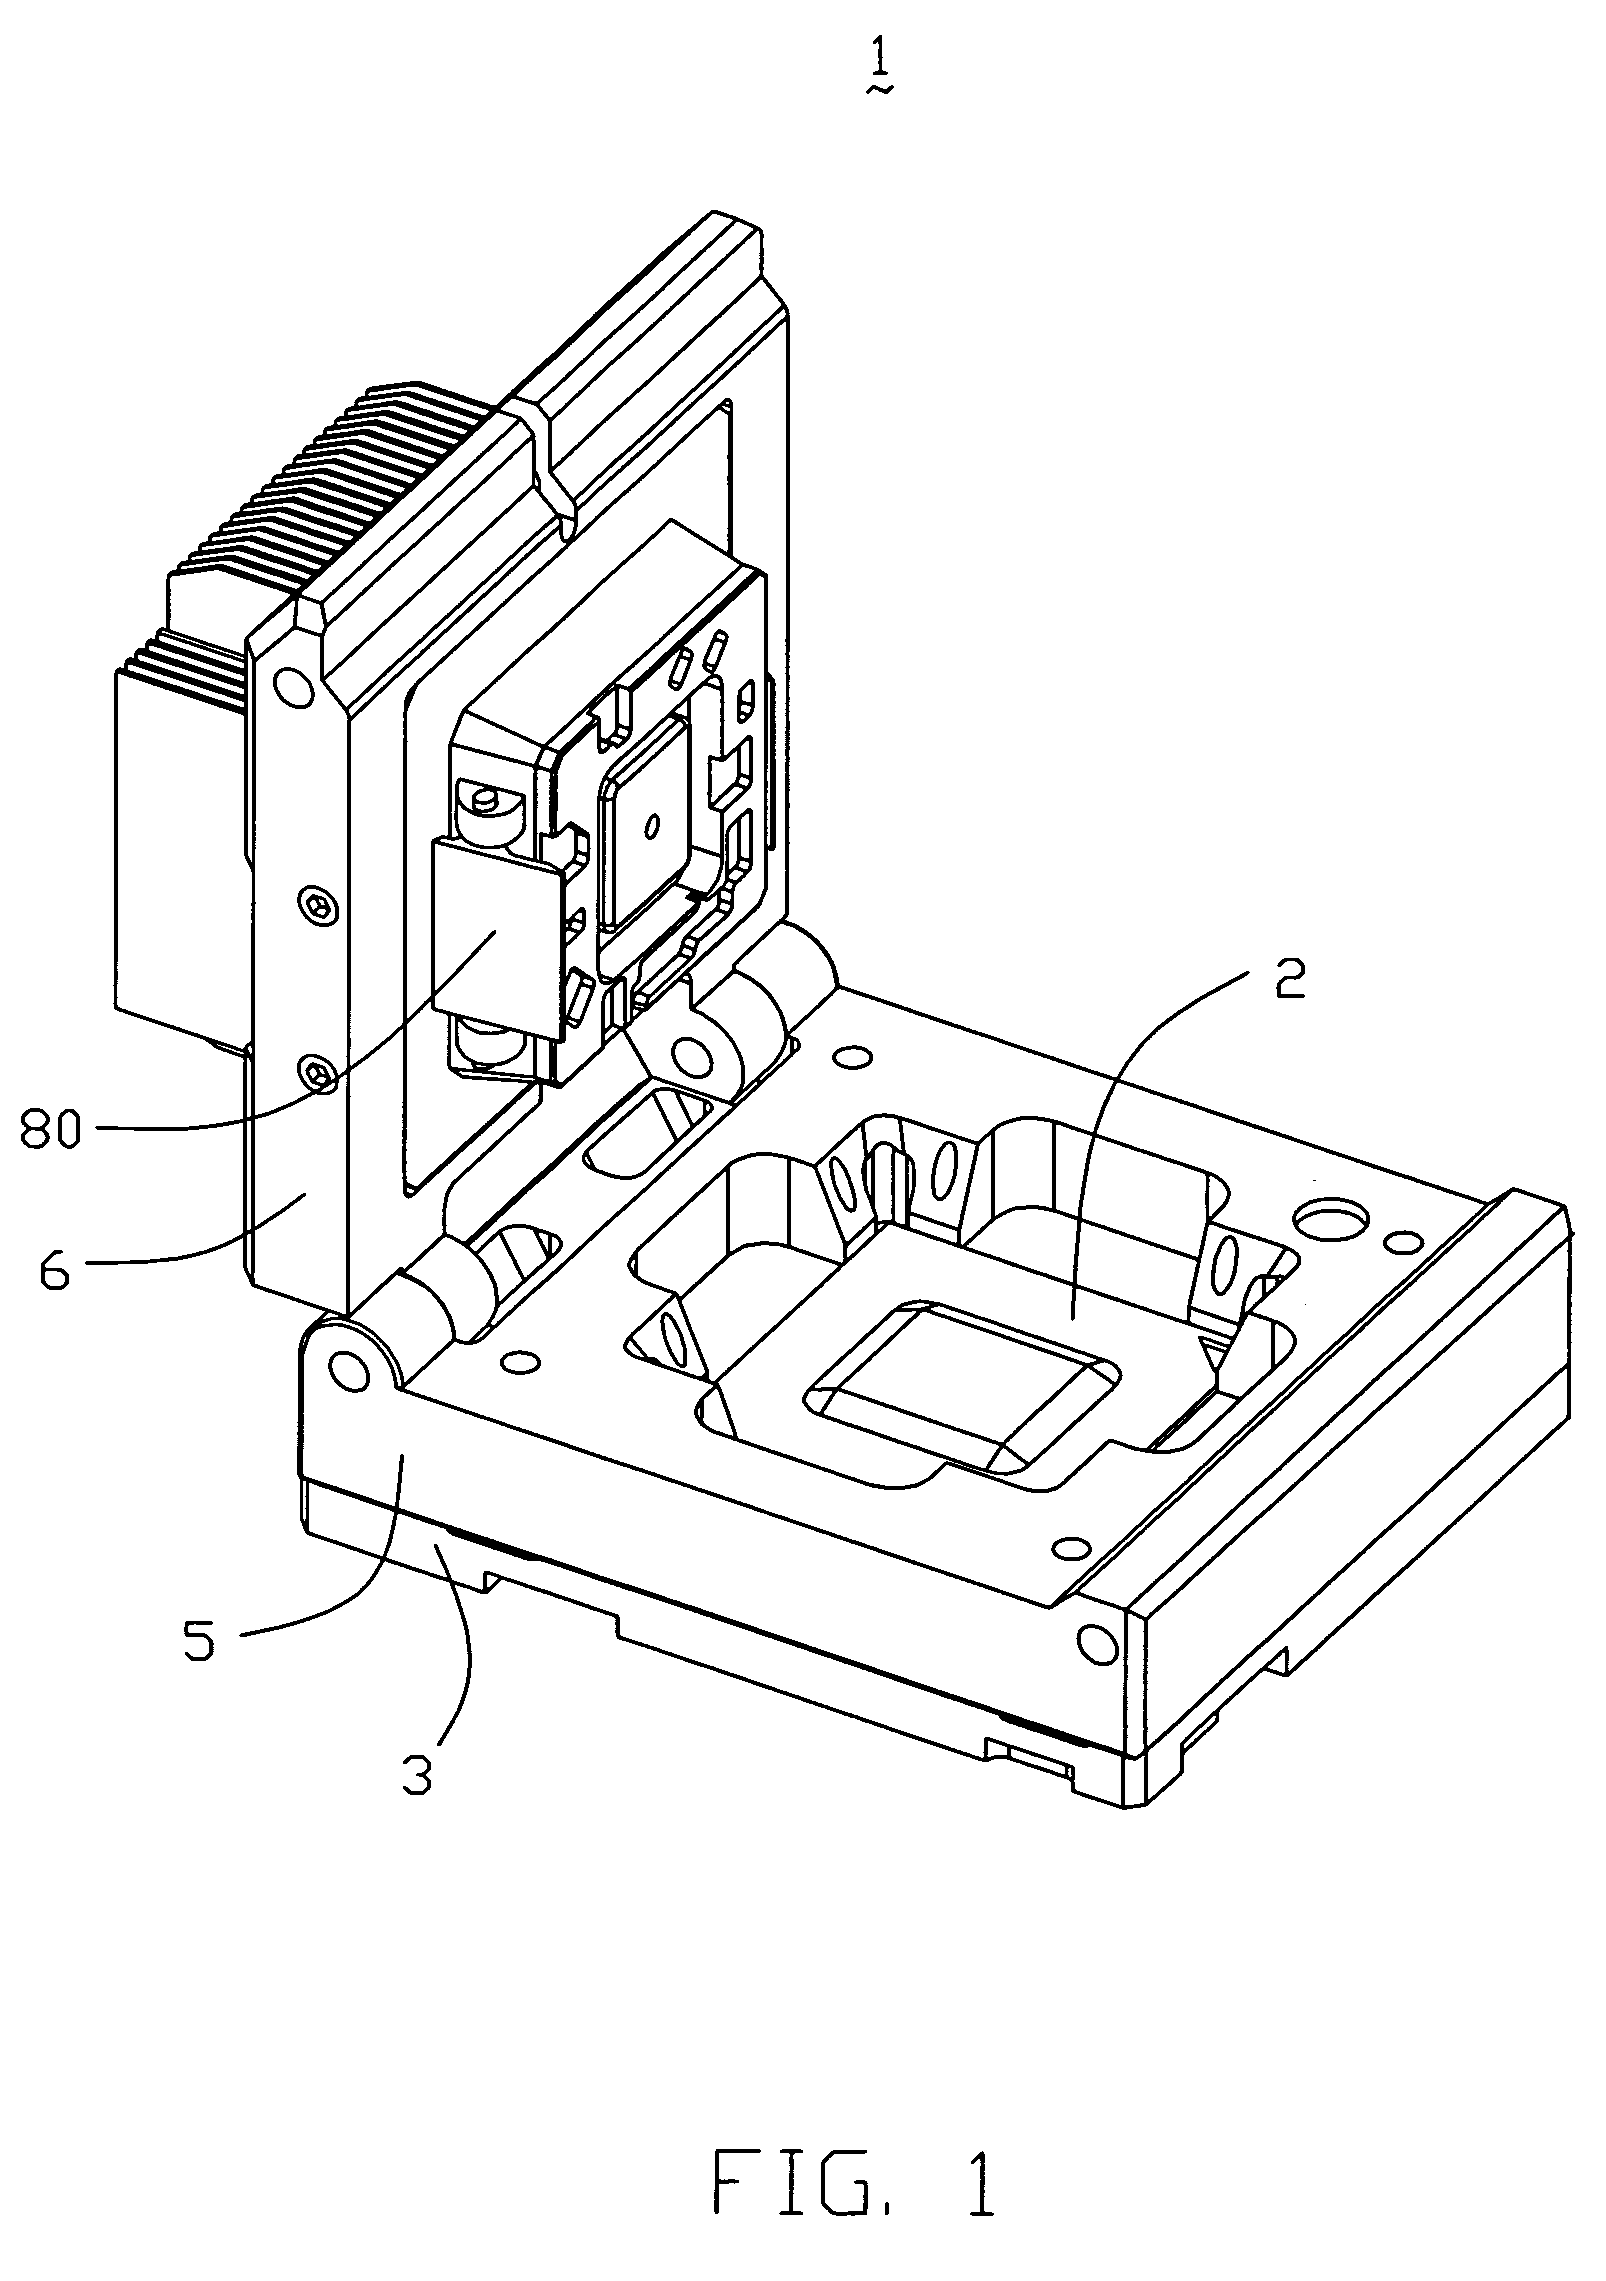 Burn-in socket having pick-up arrangement for quickly pick-up IC package after IC package is tested